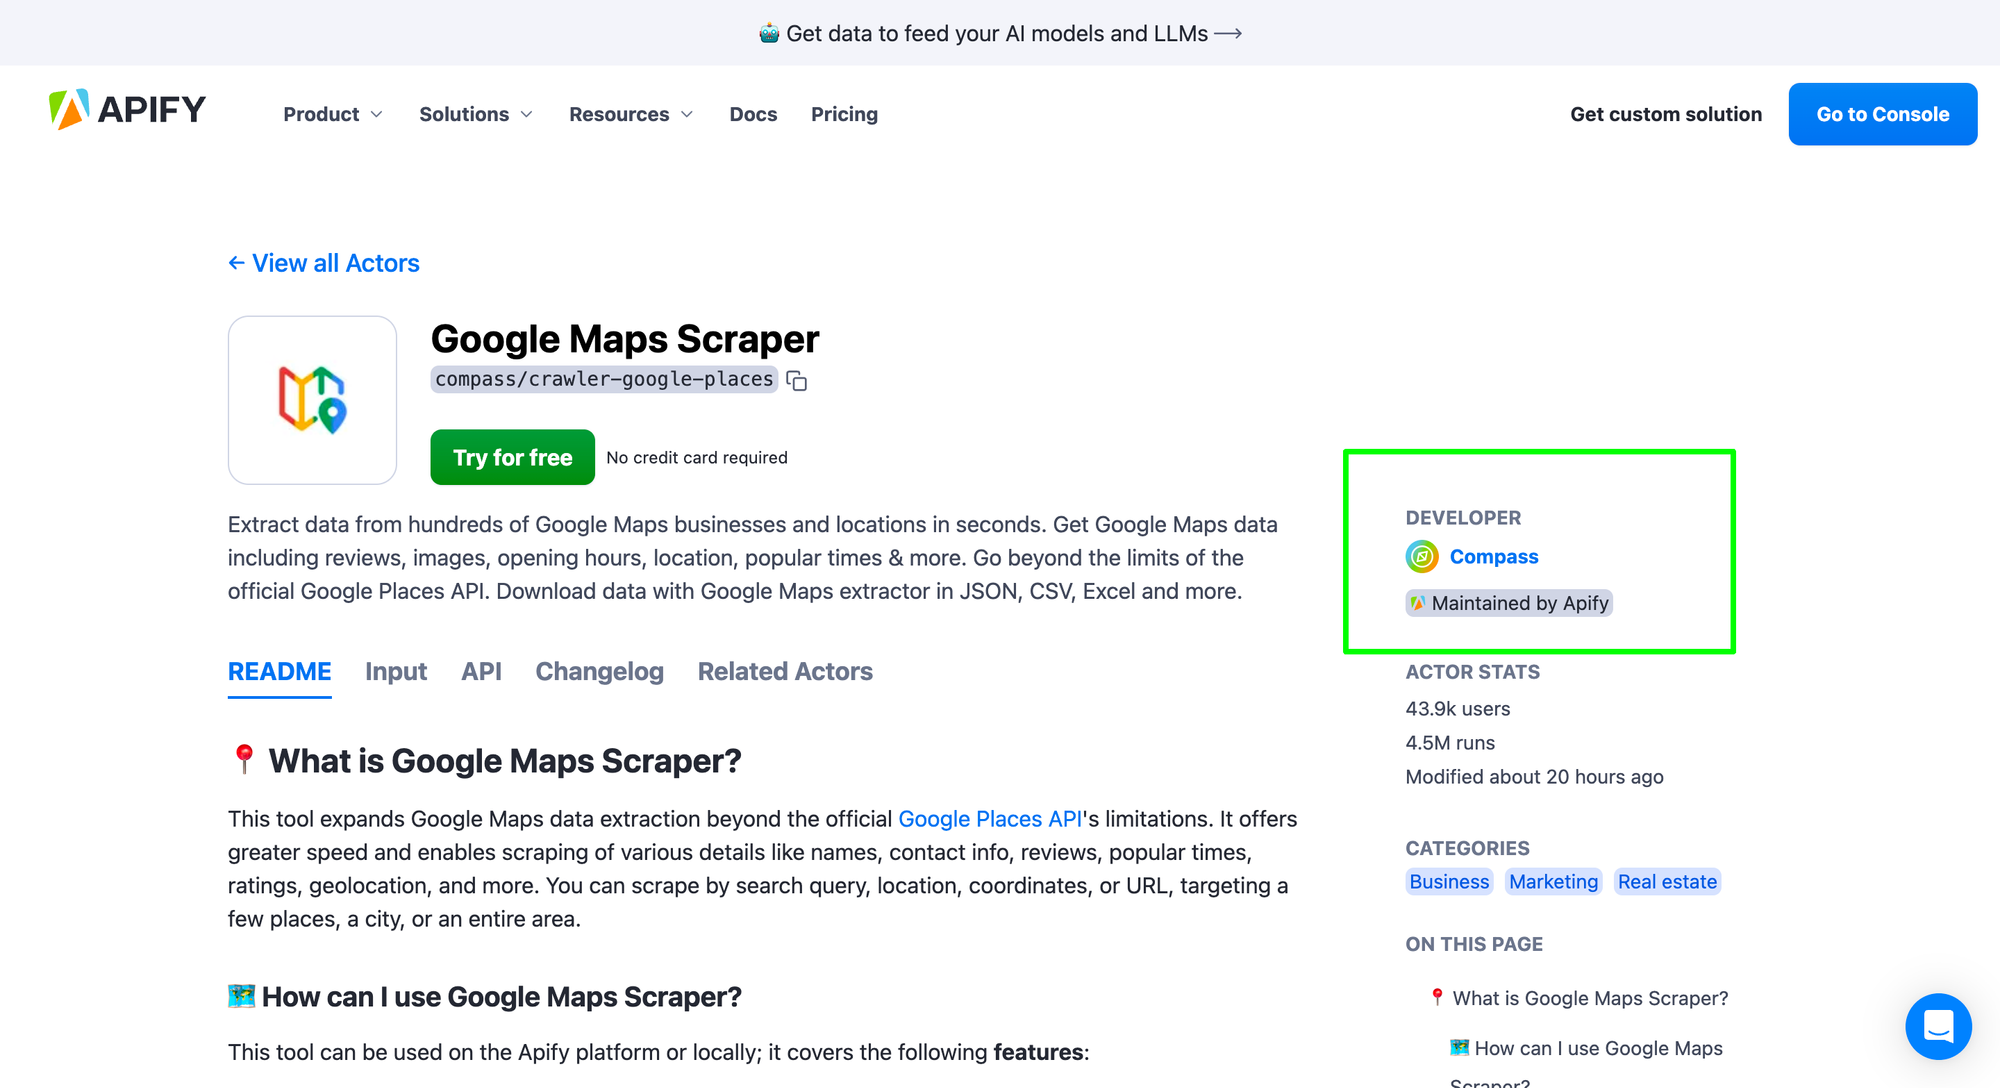 Google Maps Scraper in Apify Store is maintained by Apify